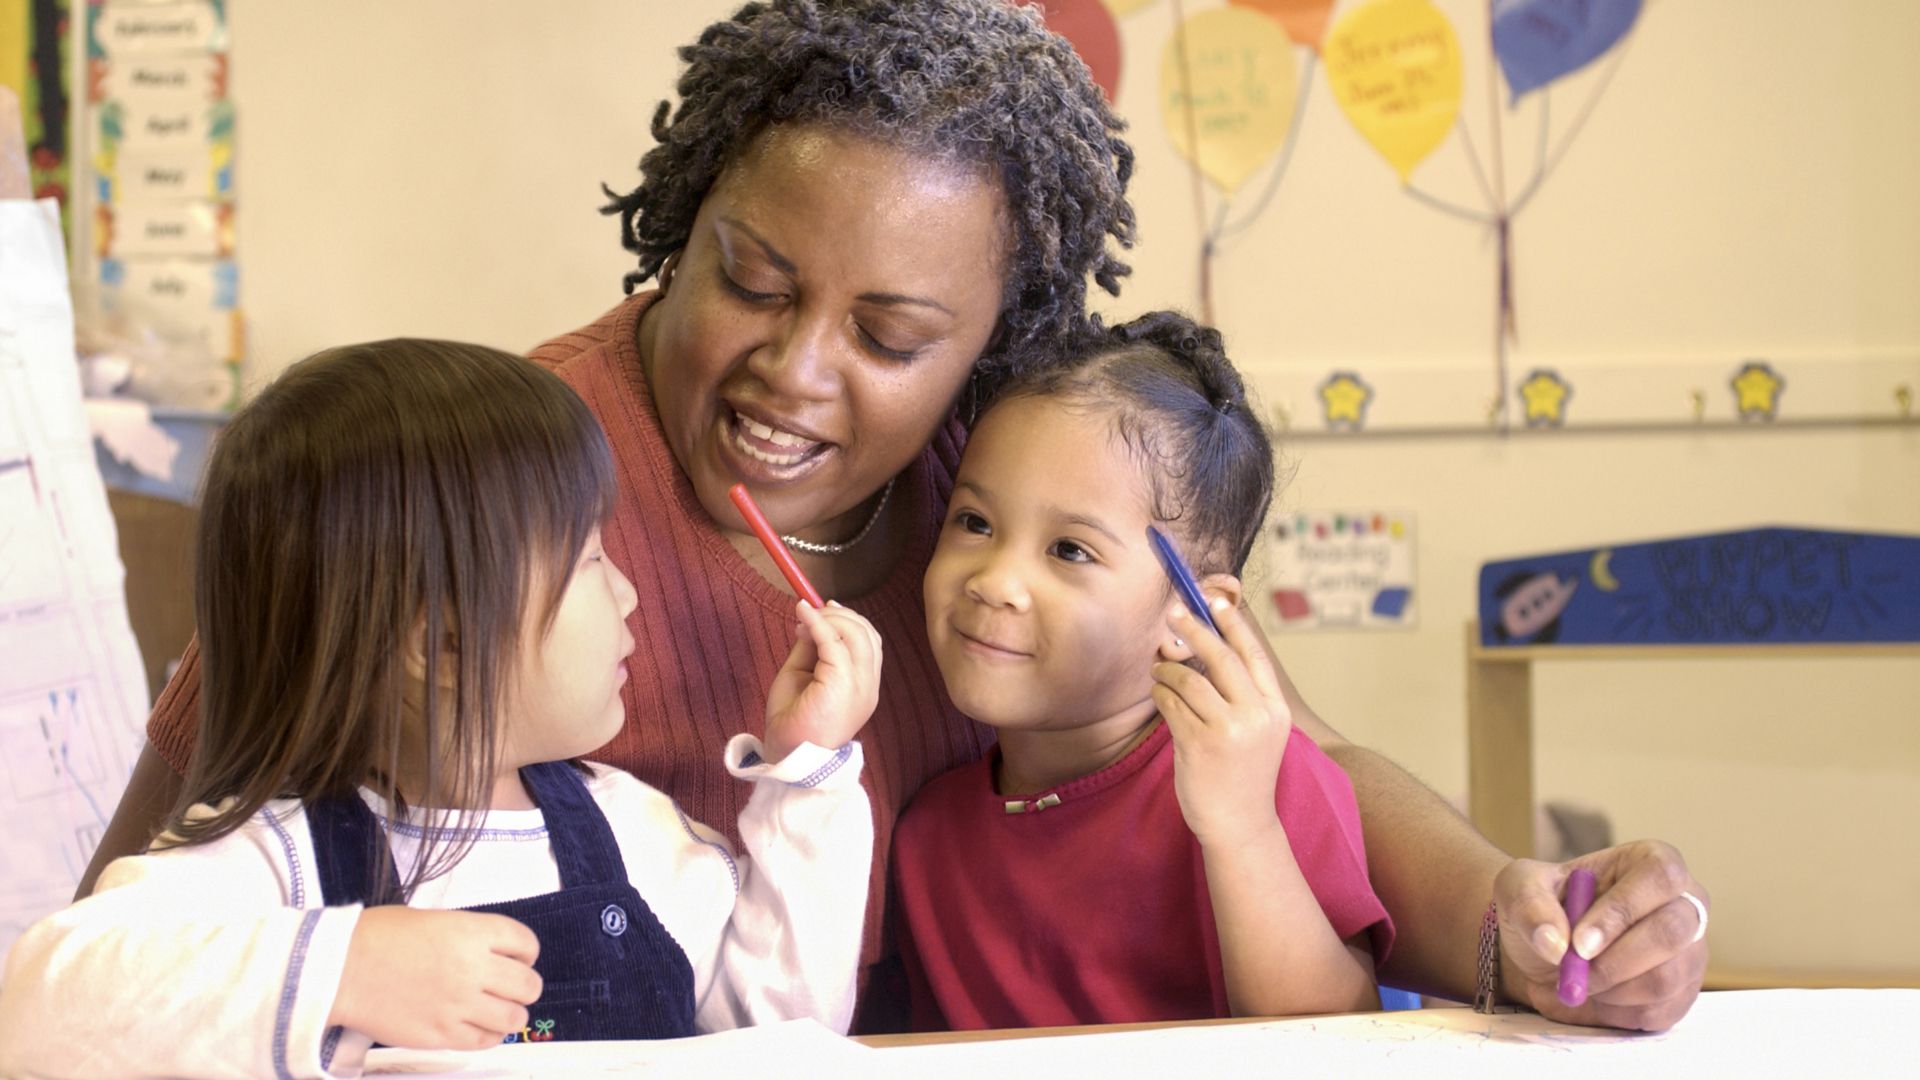 A teacher smiles and works with two small children in an early childhood classroom